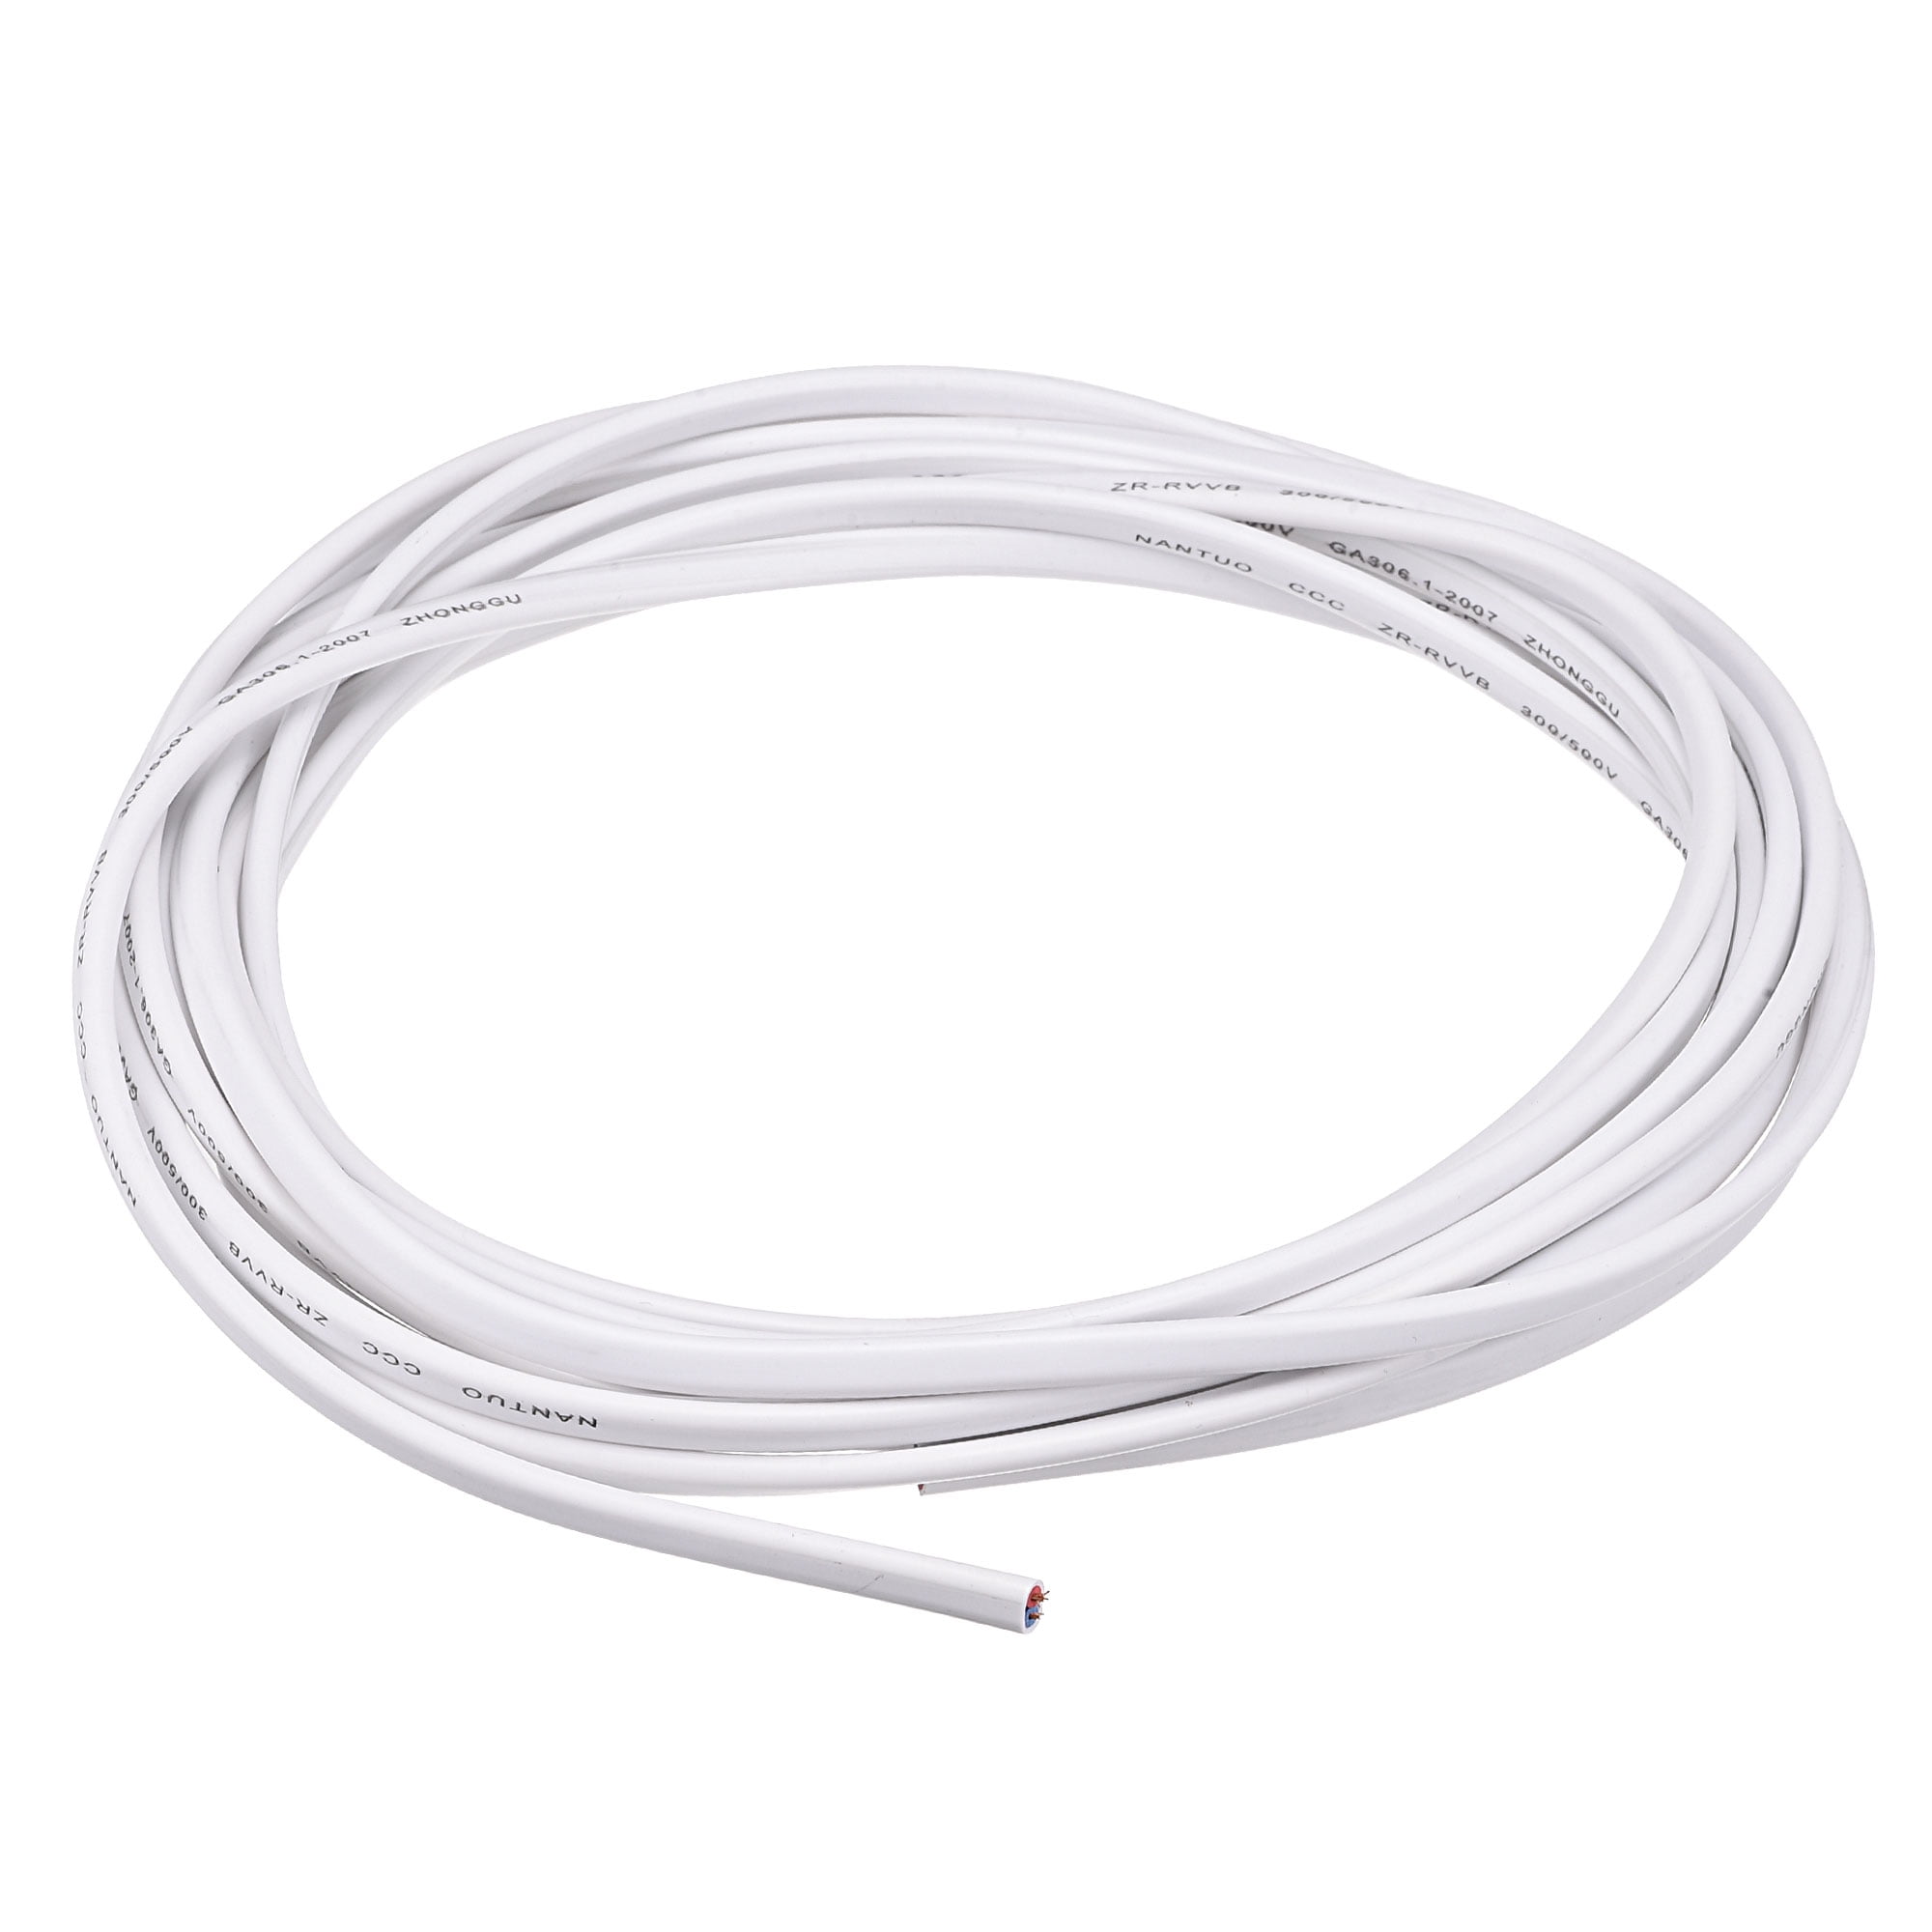 A+ Electric White Plastic Cord Cover Wall - 104 Cable Raceway for 1-2  Cables